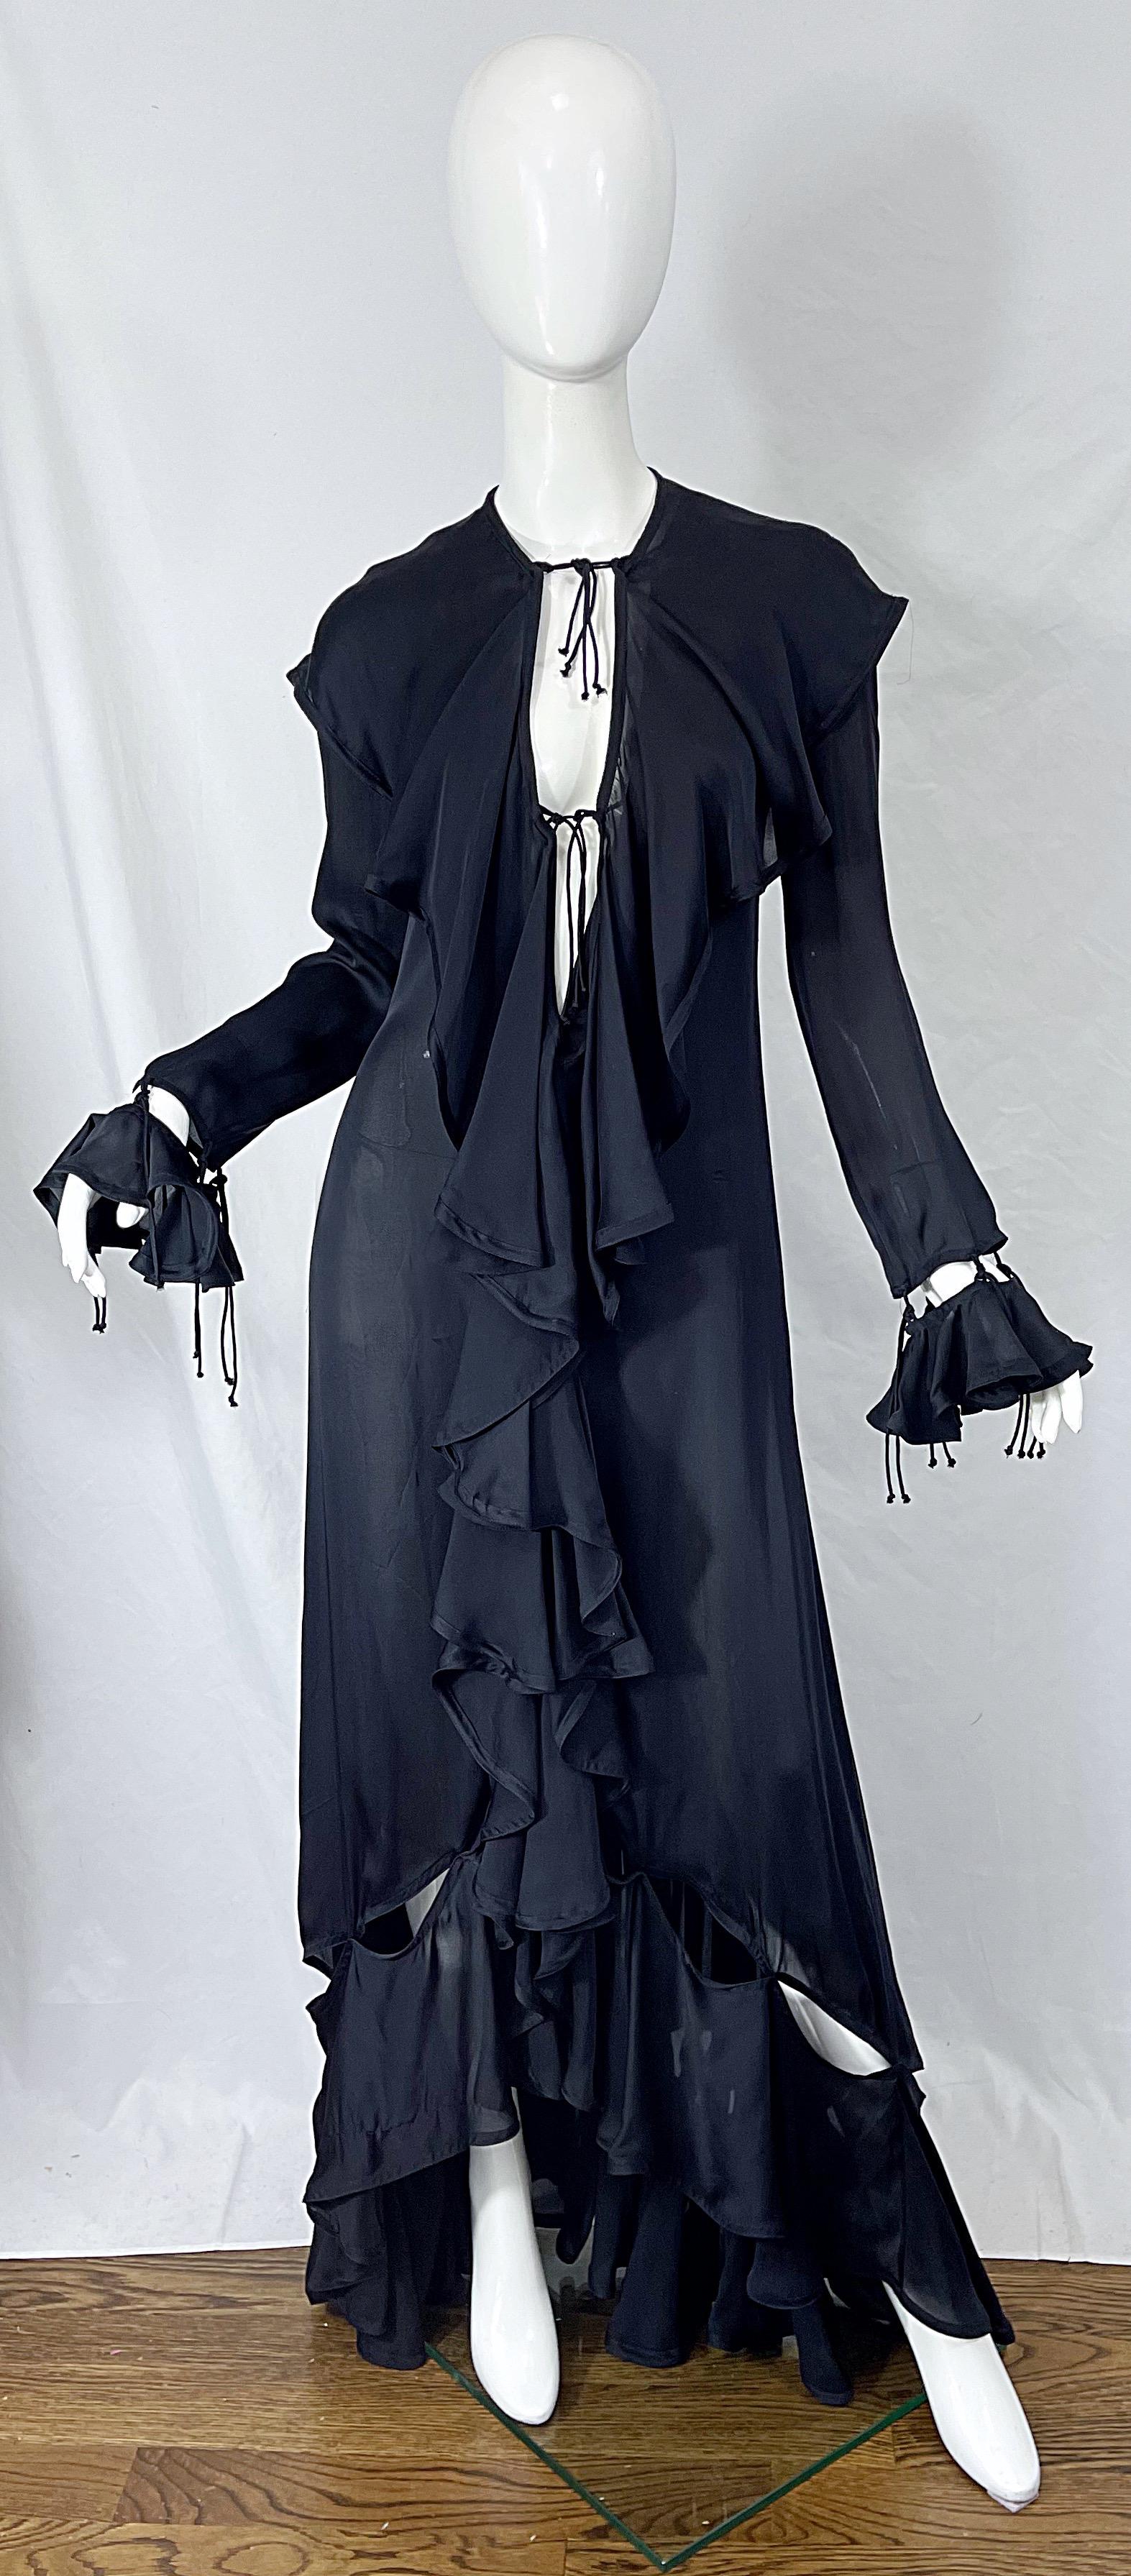 Yves Saint Laurent by Tom Ford Fall 2003 Runway Black Silk Chiffon Gown Size 38 For Sale 9